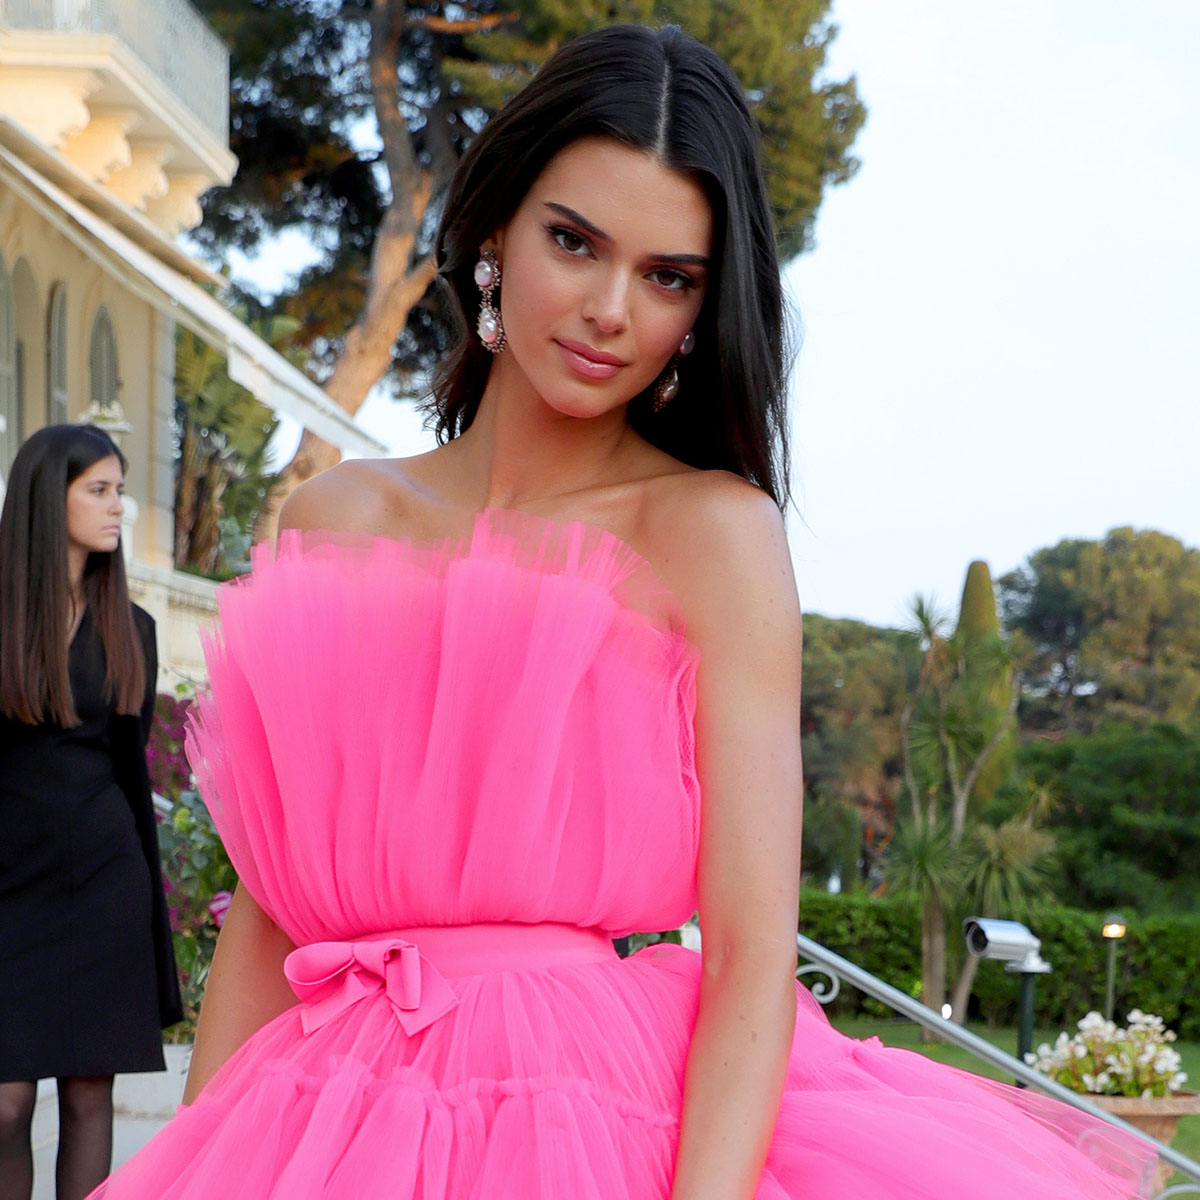 Kendall Jenner Sunbathes Nude in Racy New Photo